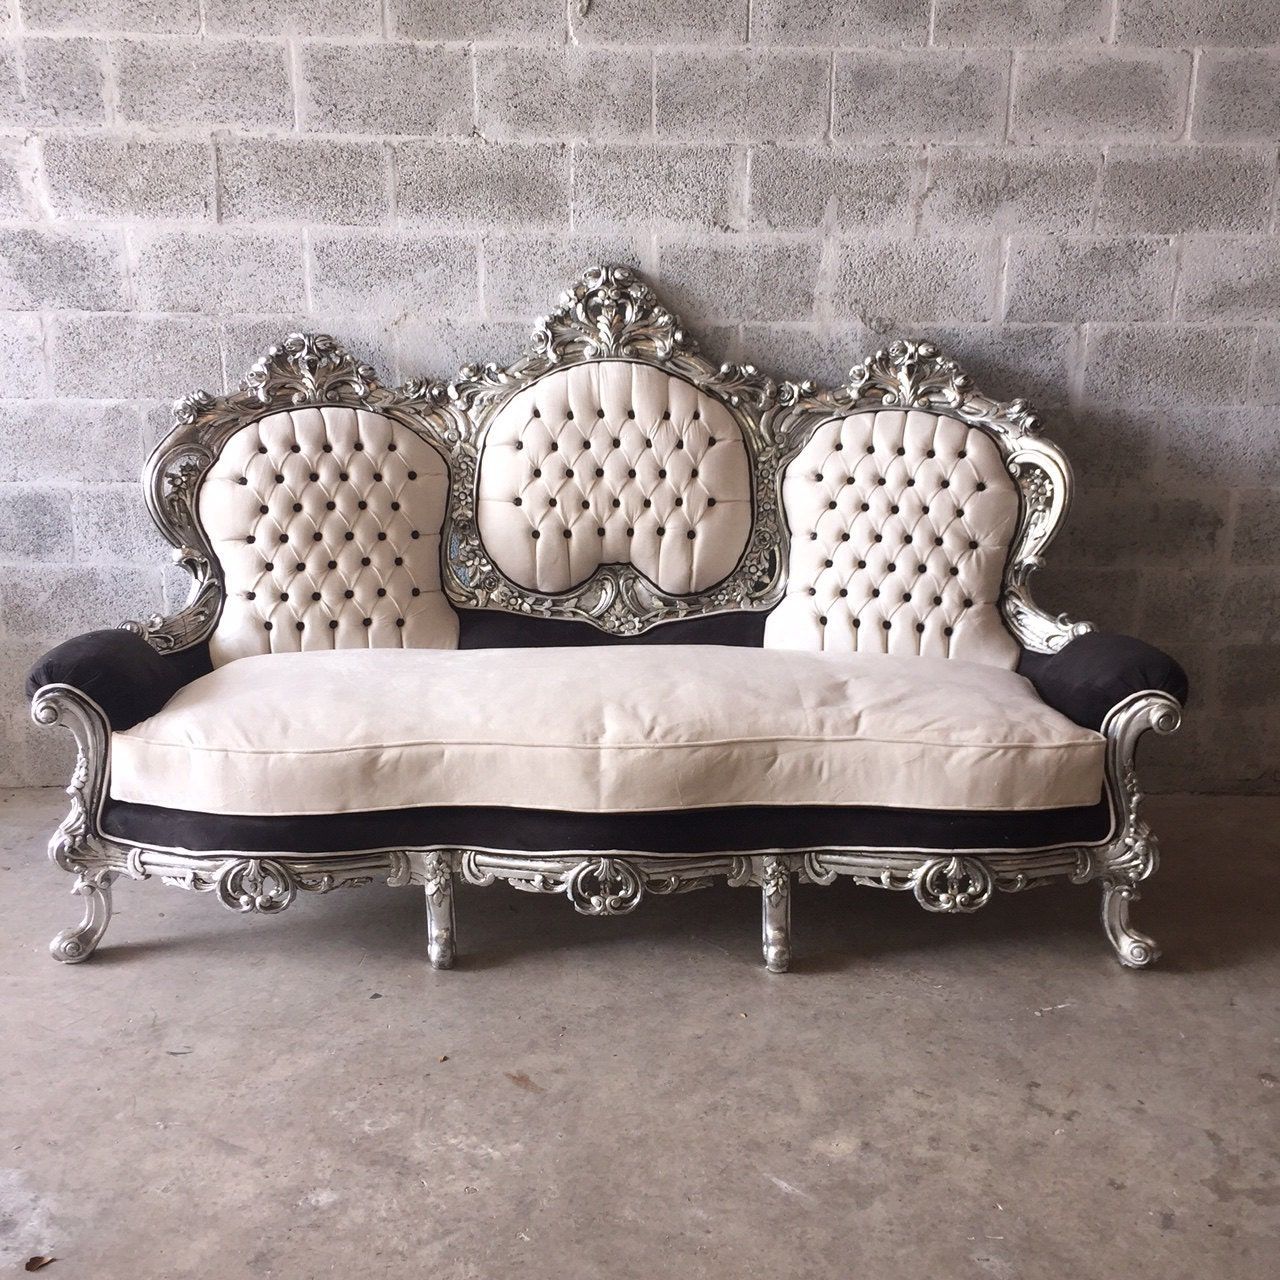 Tufted Settee Rococo Furniture Sofa Antique Italian Throne Regarding 4Pc French Seamed Sectional Sofas Velvet Black (View 1 of 15)